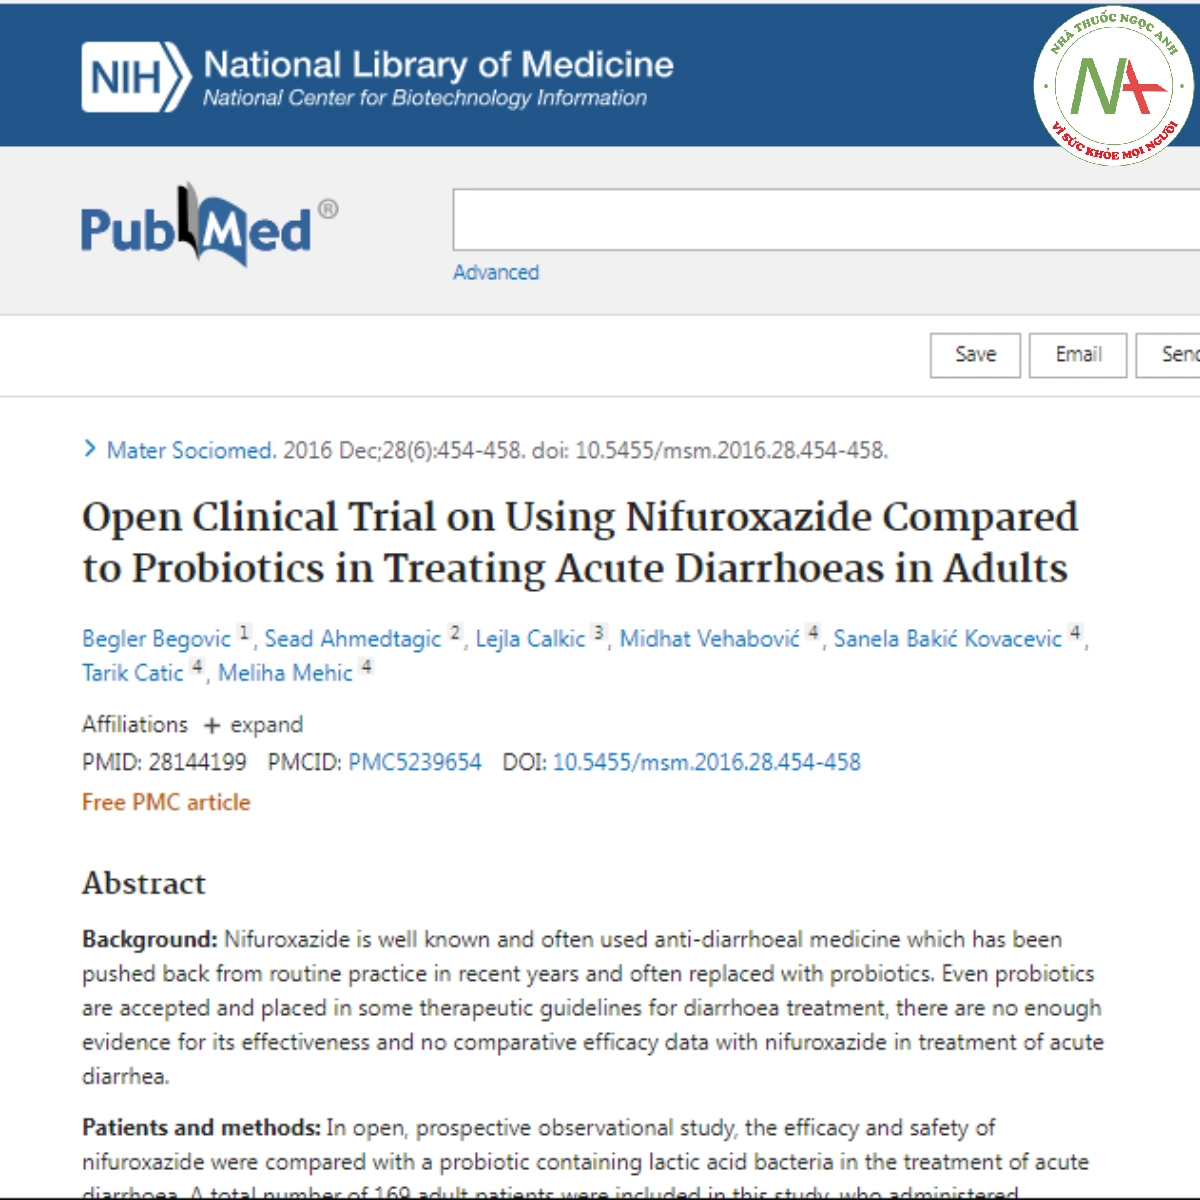 Open Clinical Trial on Using Nifuroxazide Compared to Probiotics in Treating Acute Diarrhoeas in Adults